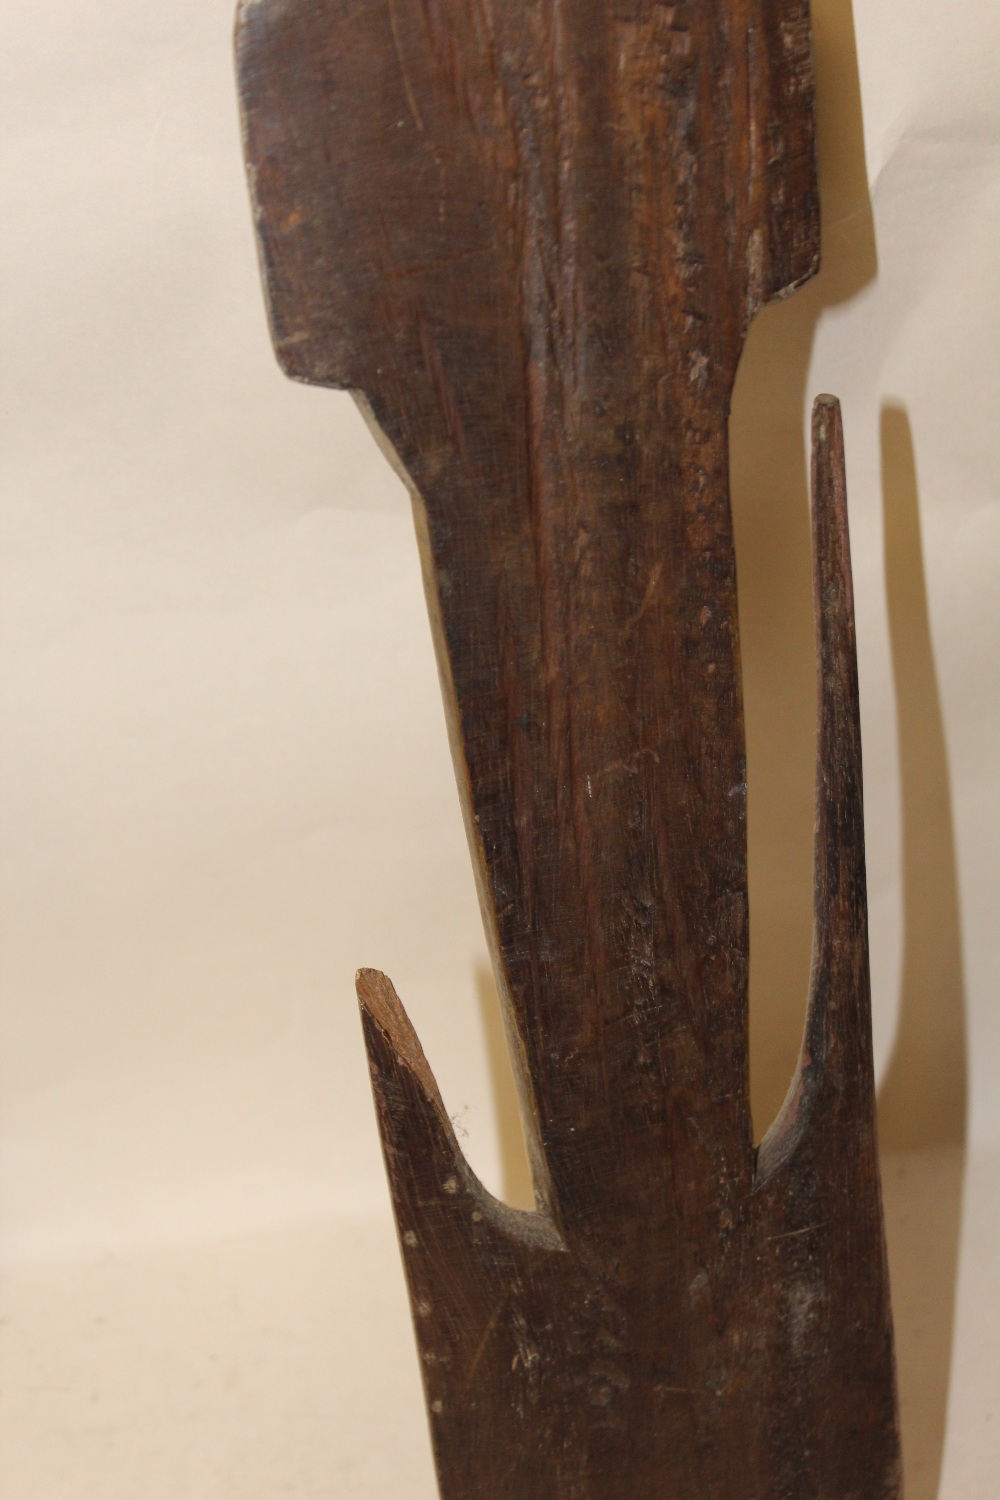 A PAPUA NEW GUINEA MASK AND A CARVED WOODEN AXE HANDLE - Image 3 of 3